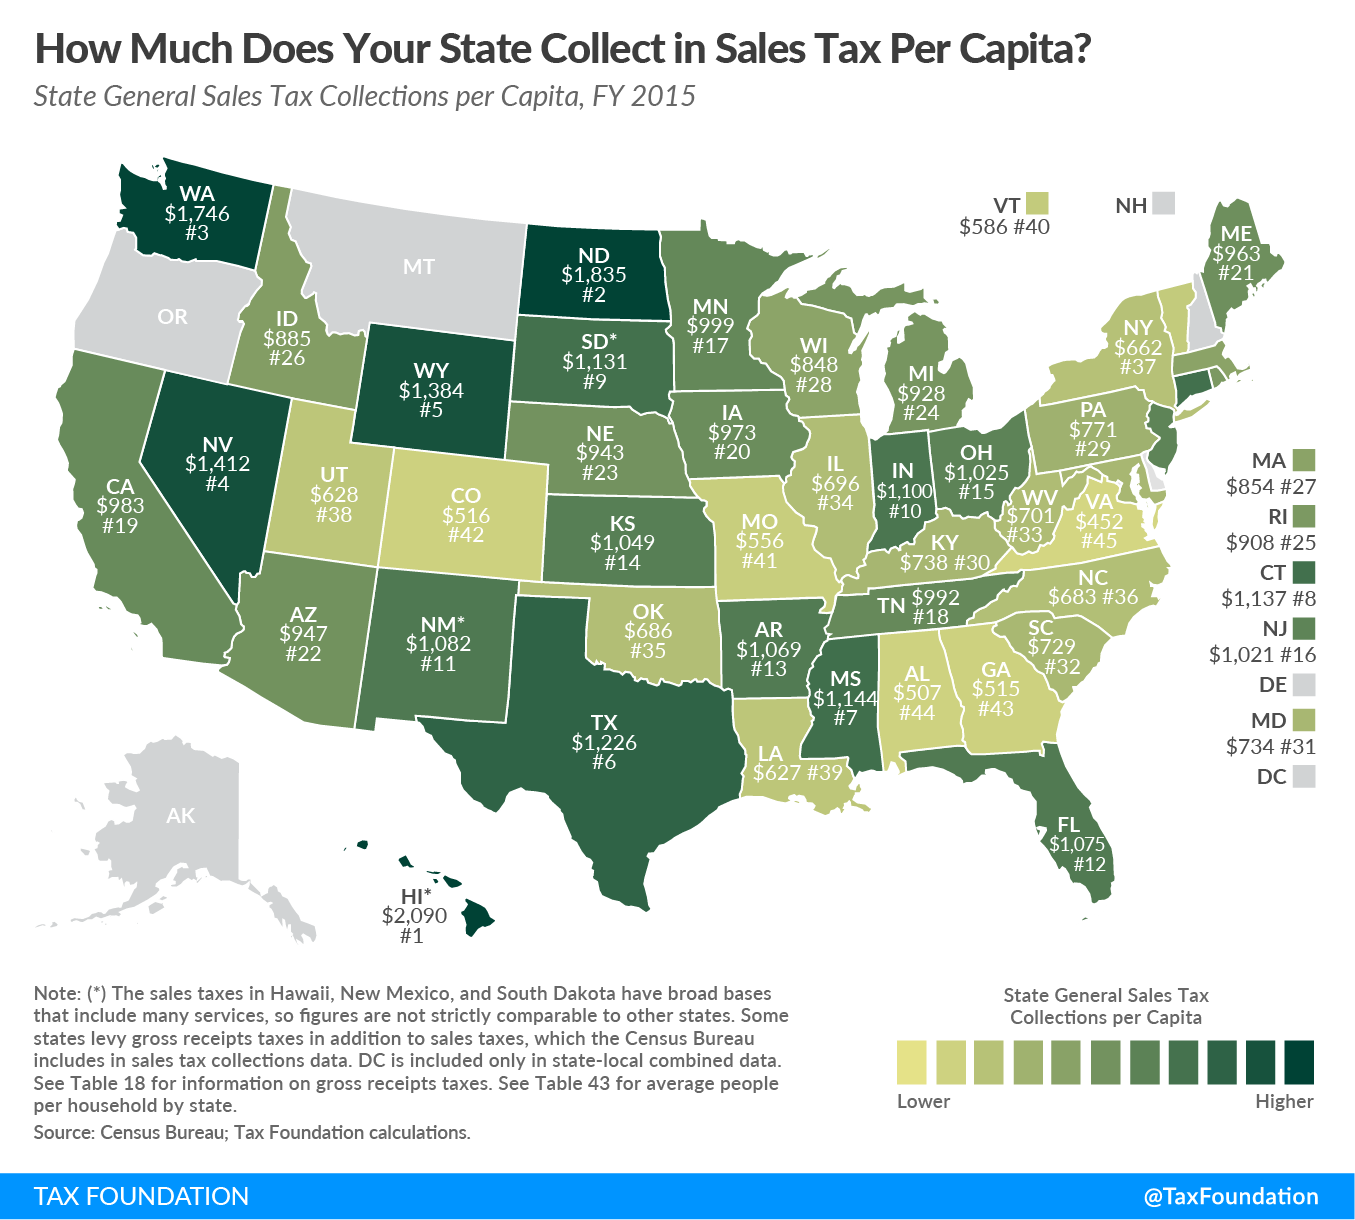 State General Sales Tax Collections per Capita, FY 2015